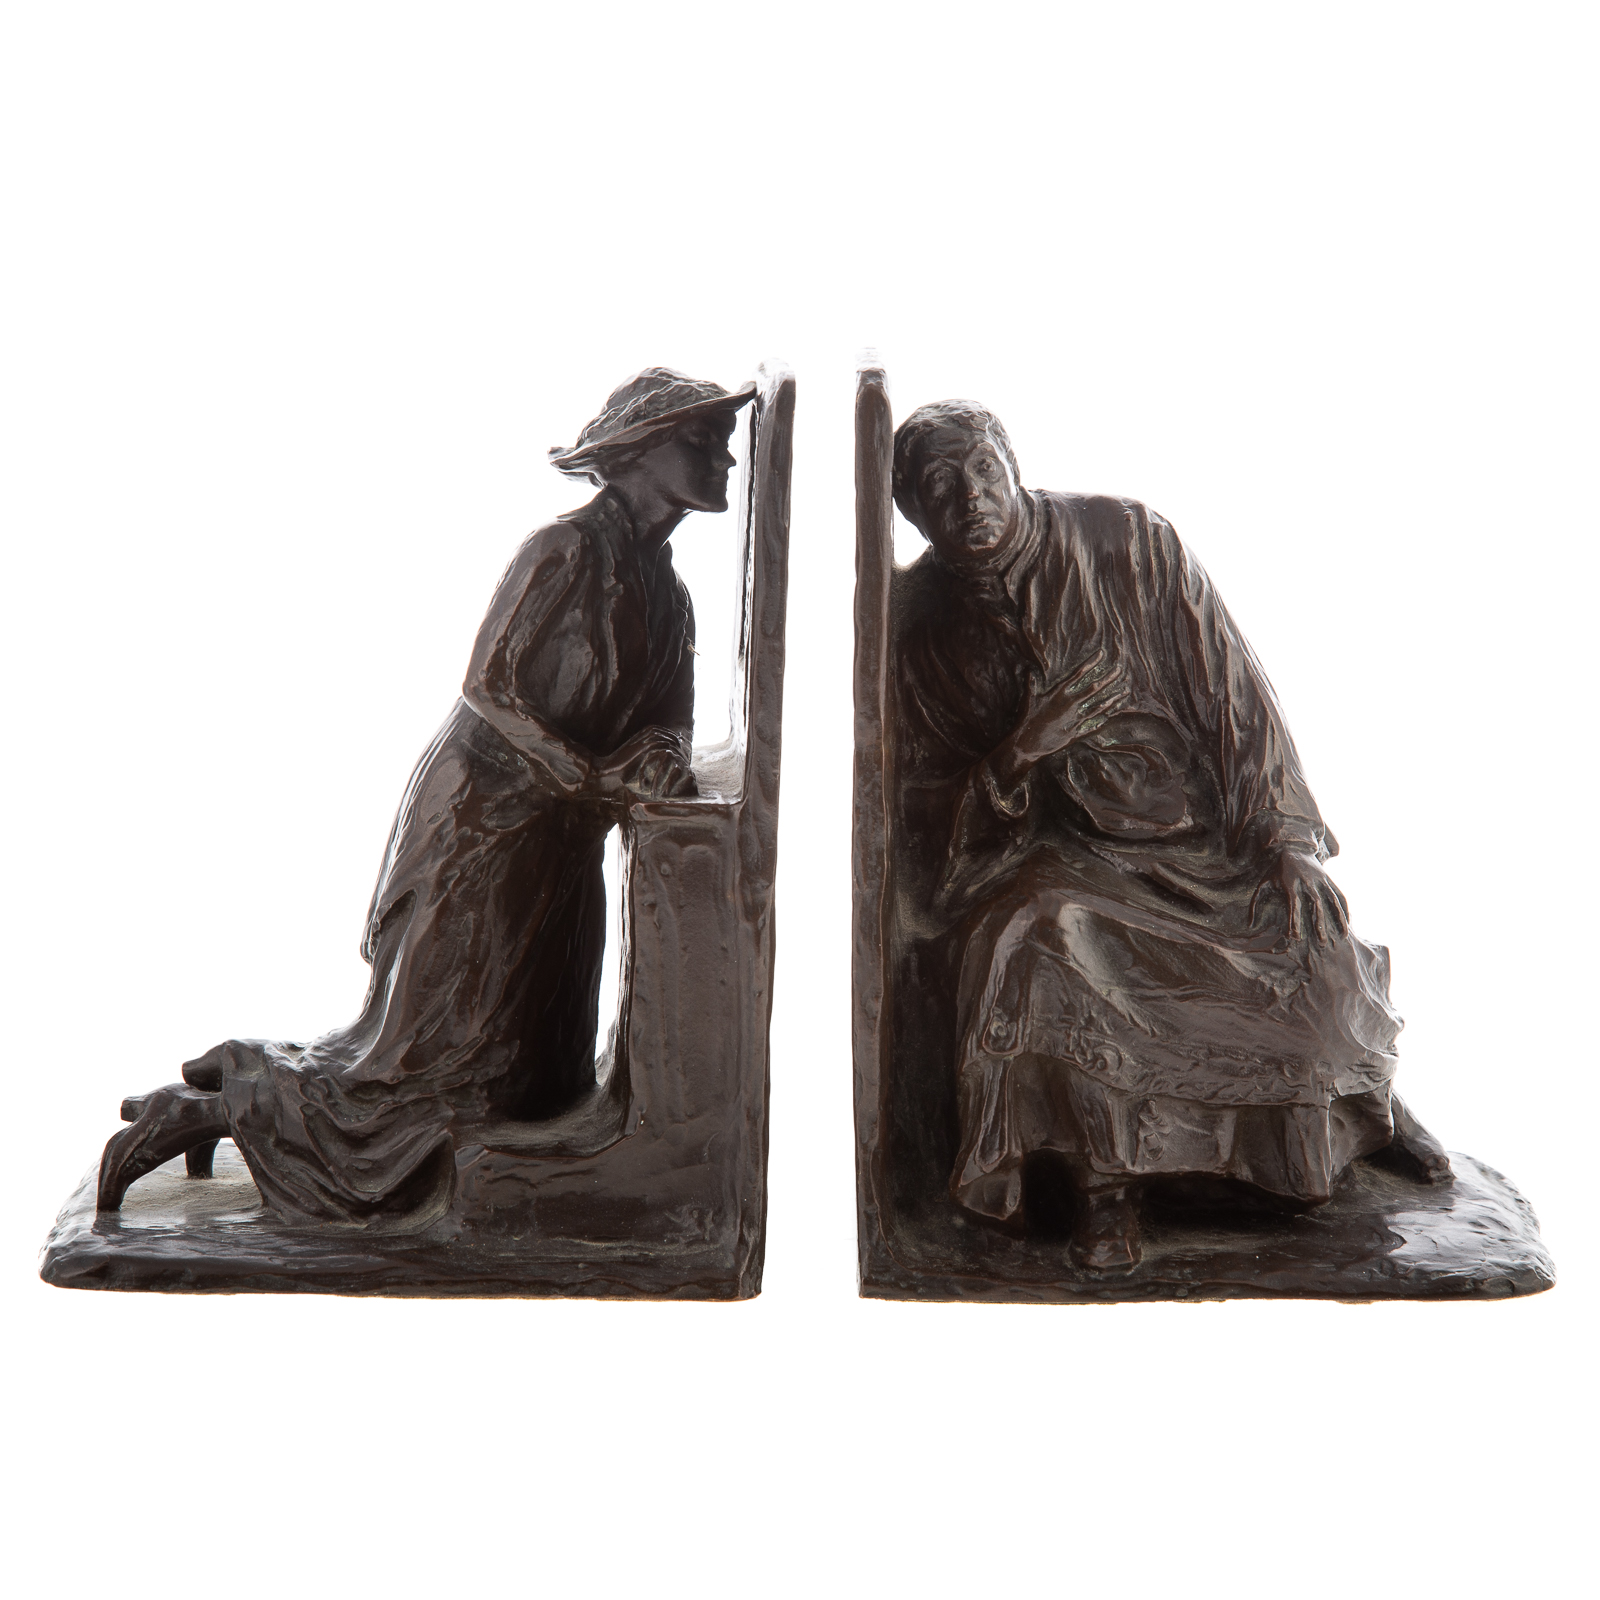 A PAIR OF GRIFFOUL BRONZE FIGURAL